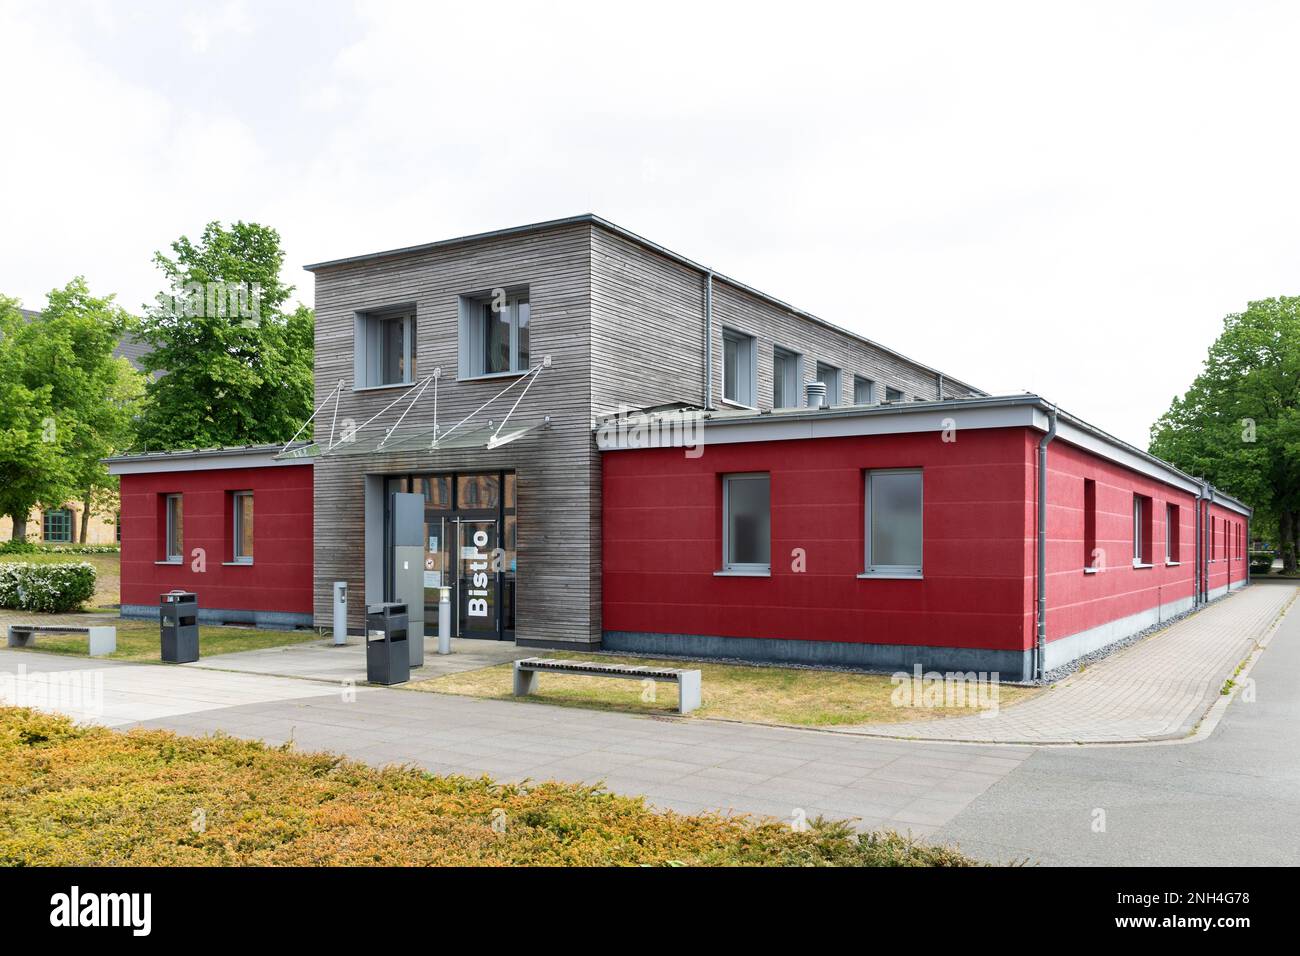 Campus Caprivi of the Osnabrueck University of Applied Sciences, Bistro, former Caprivi Barracks, Osnabrueck, Lower Saxony, Germany Stock Photo